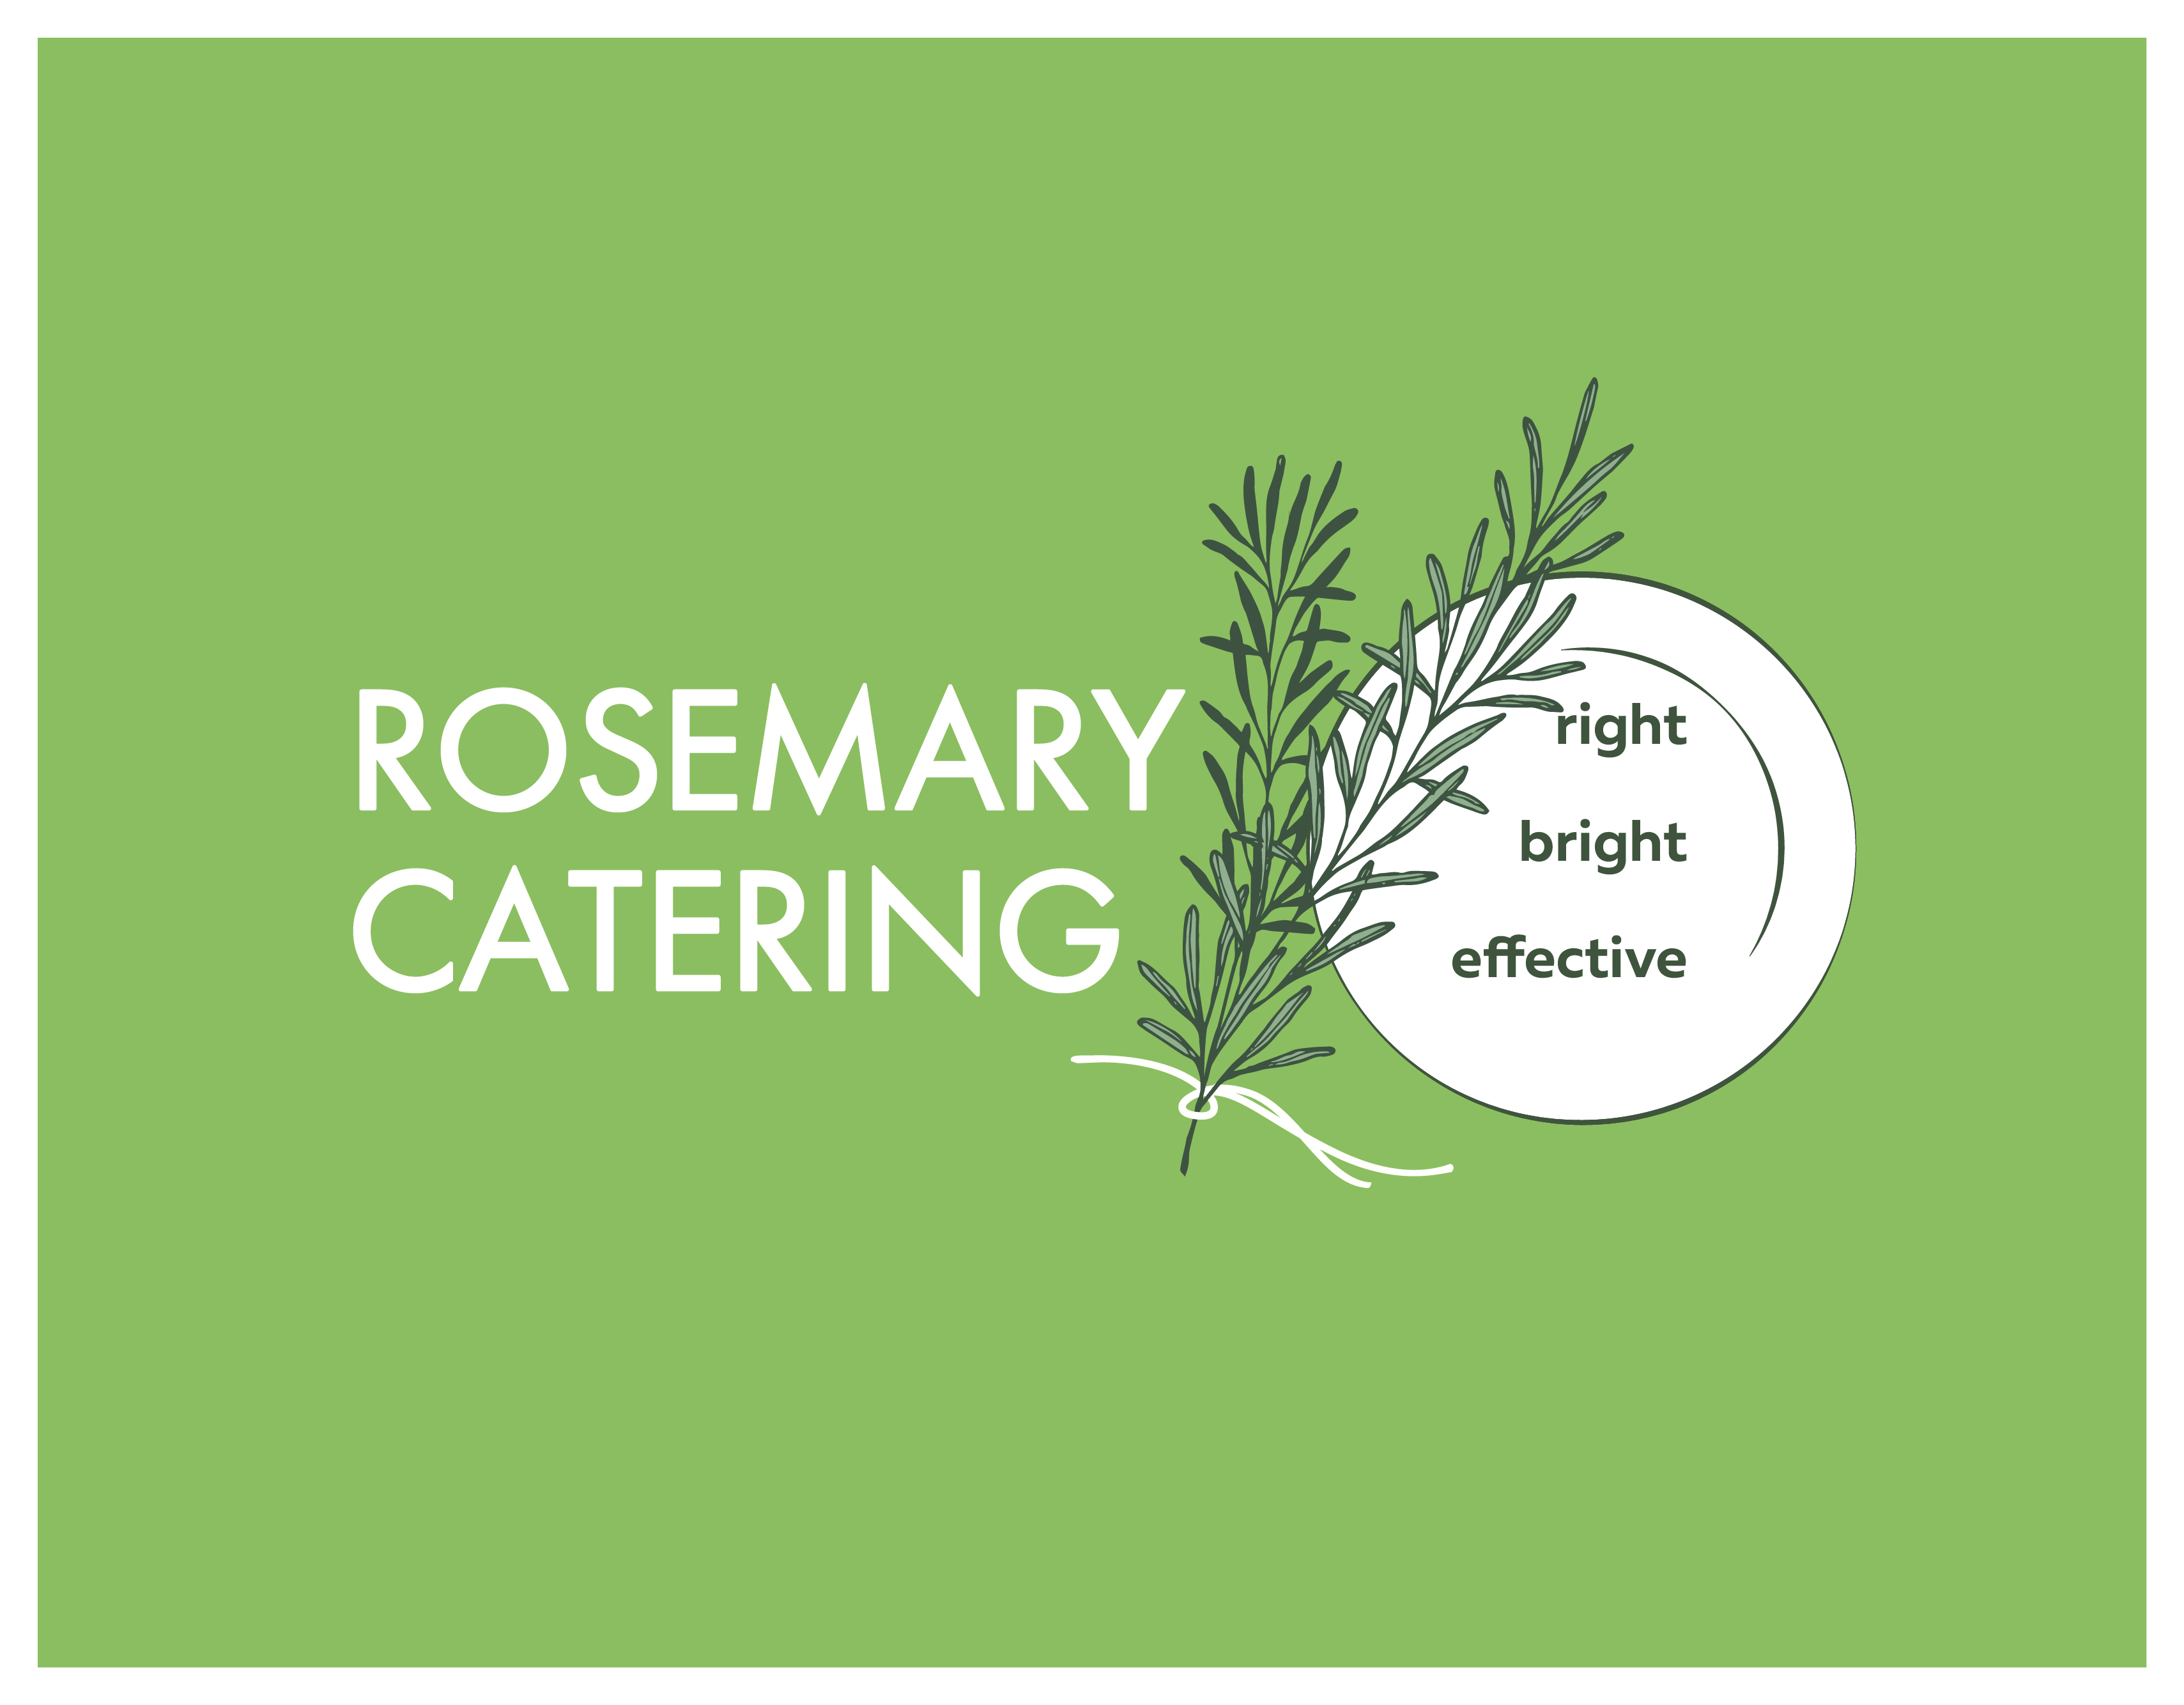 ROSEMARY CATERING